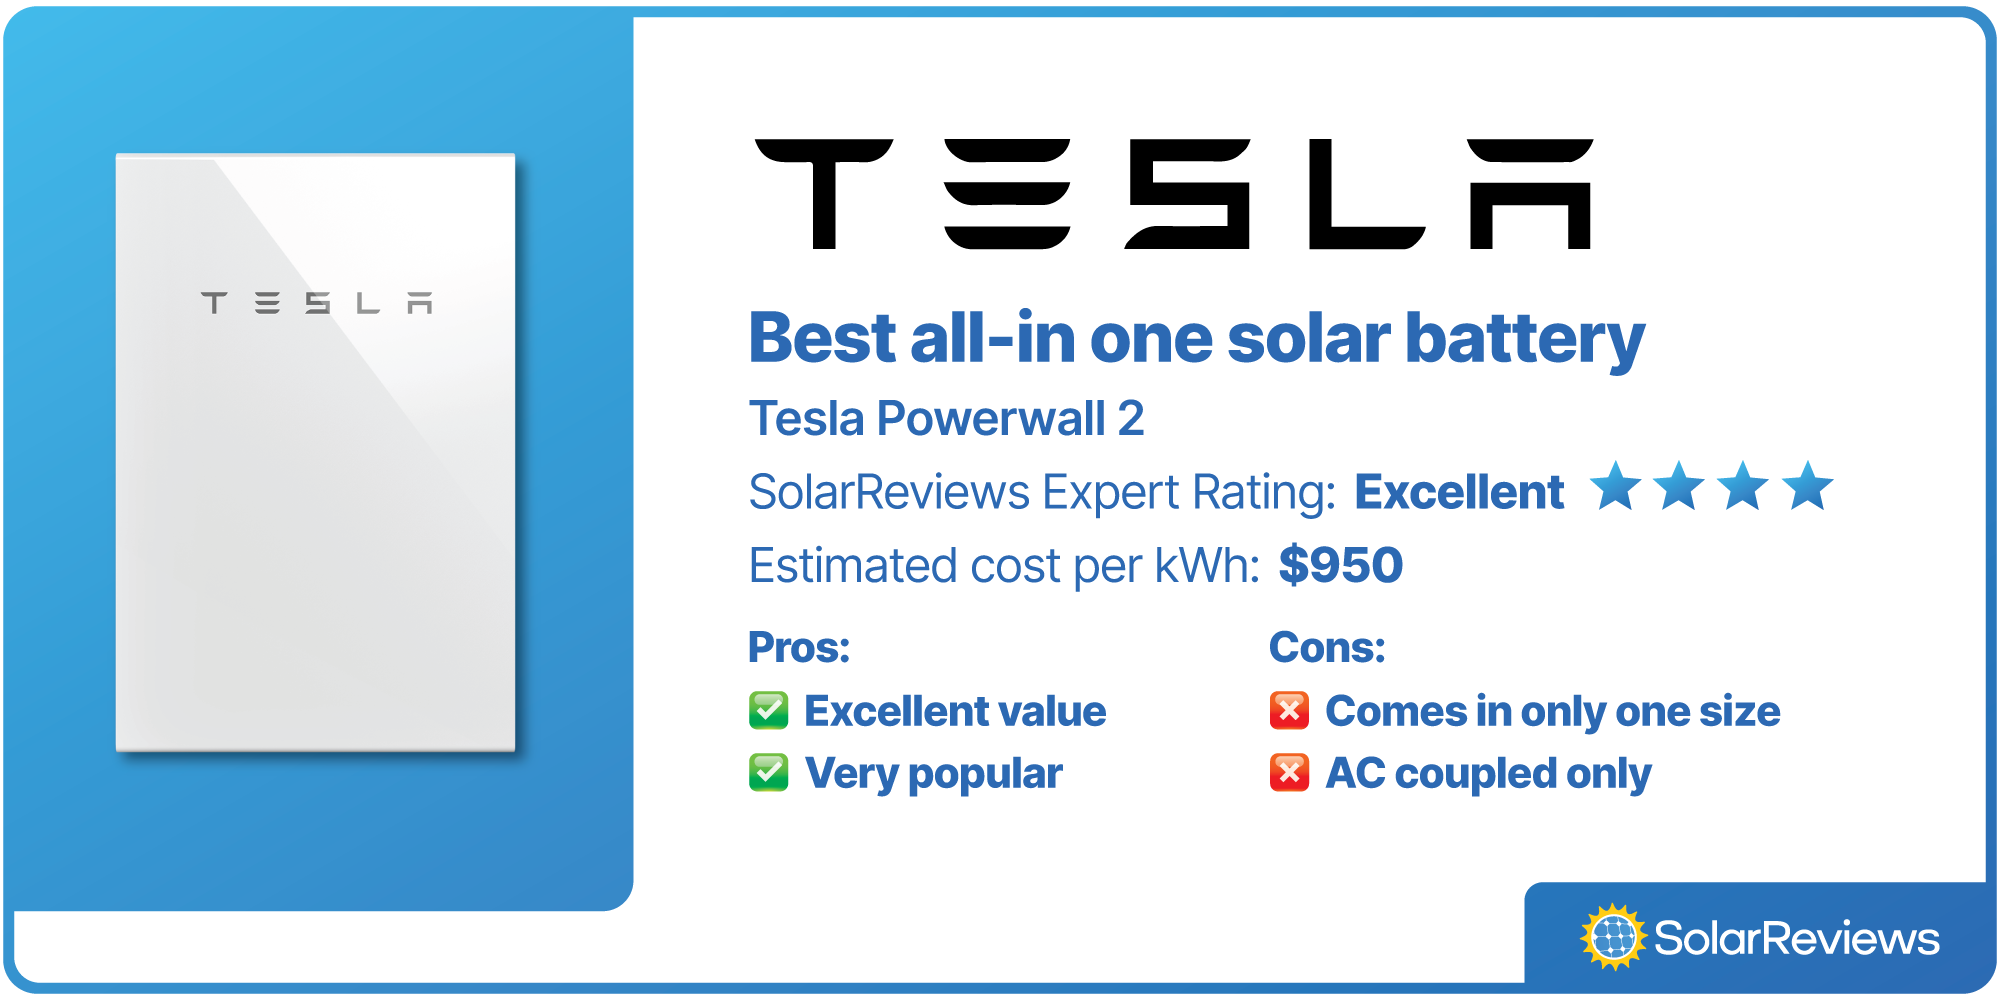 Tesla Powerwall was voted best all-in-one solar battery, with a SolarReviews rating of Excellent (4 stars), and estimated cost per kWh of $950.